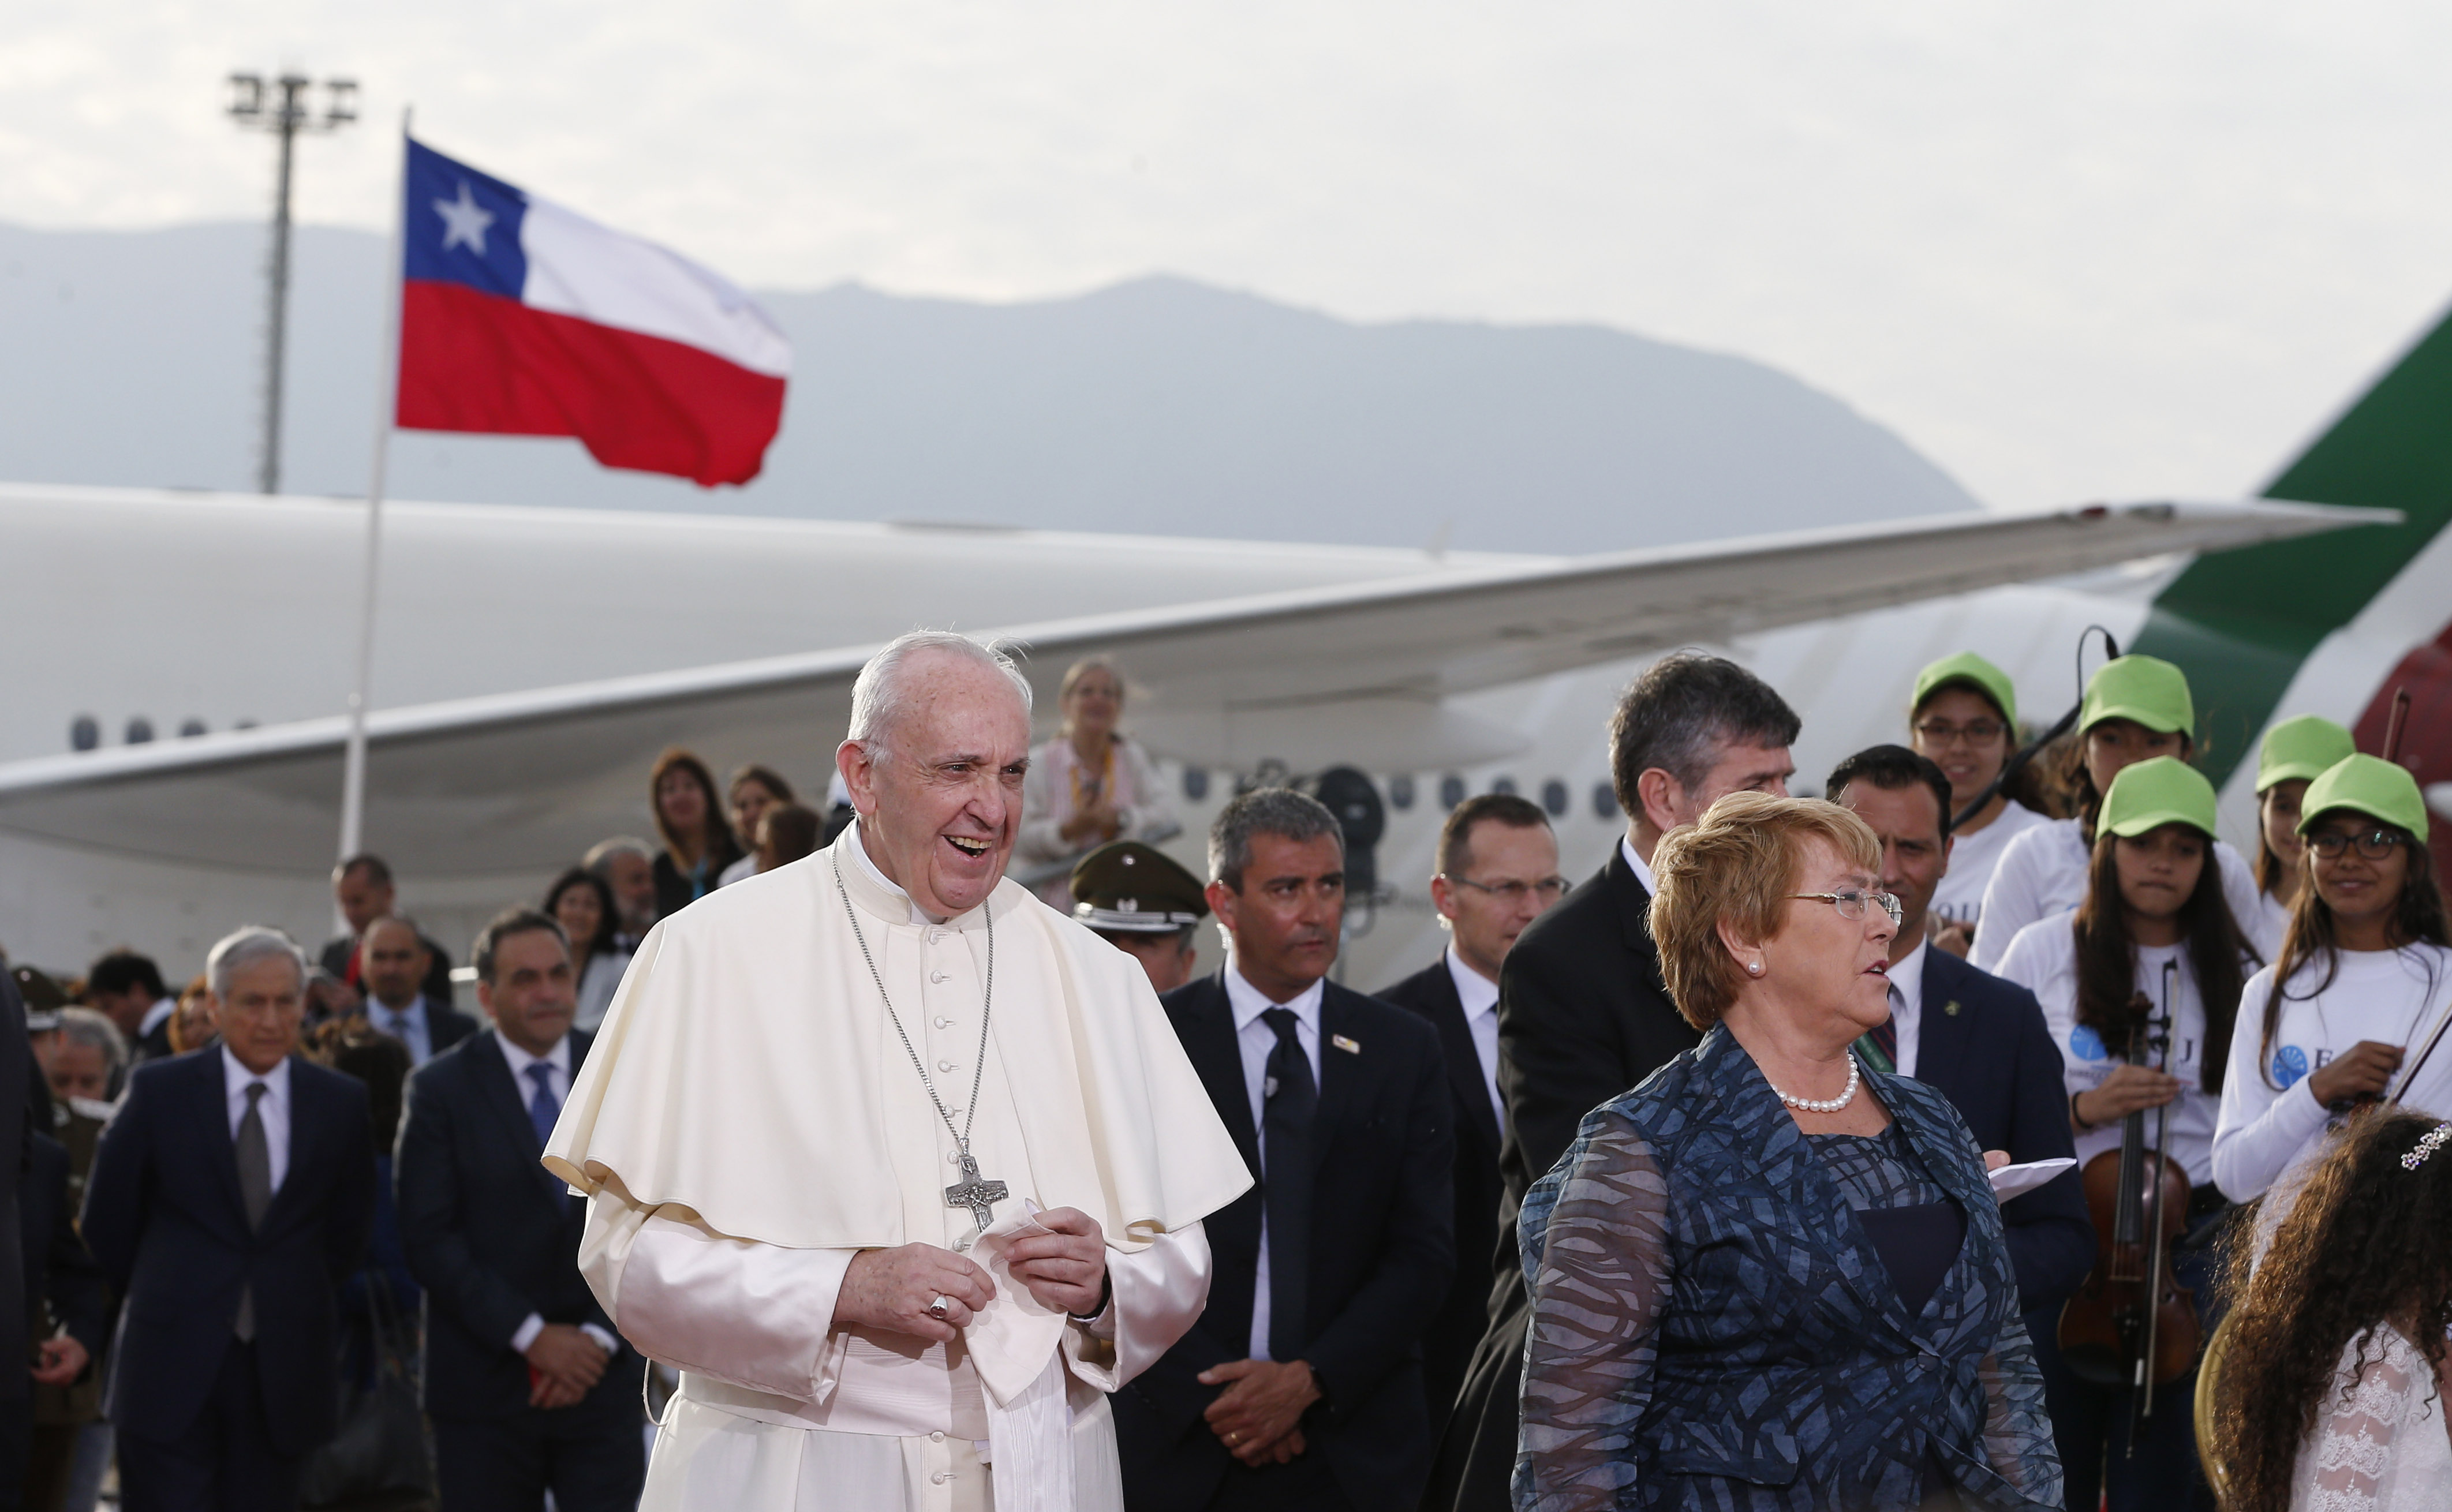 Papal visit to Chile and Peru begins amid security concerns